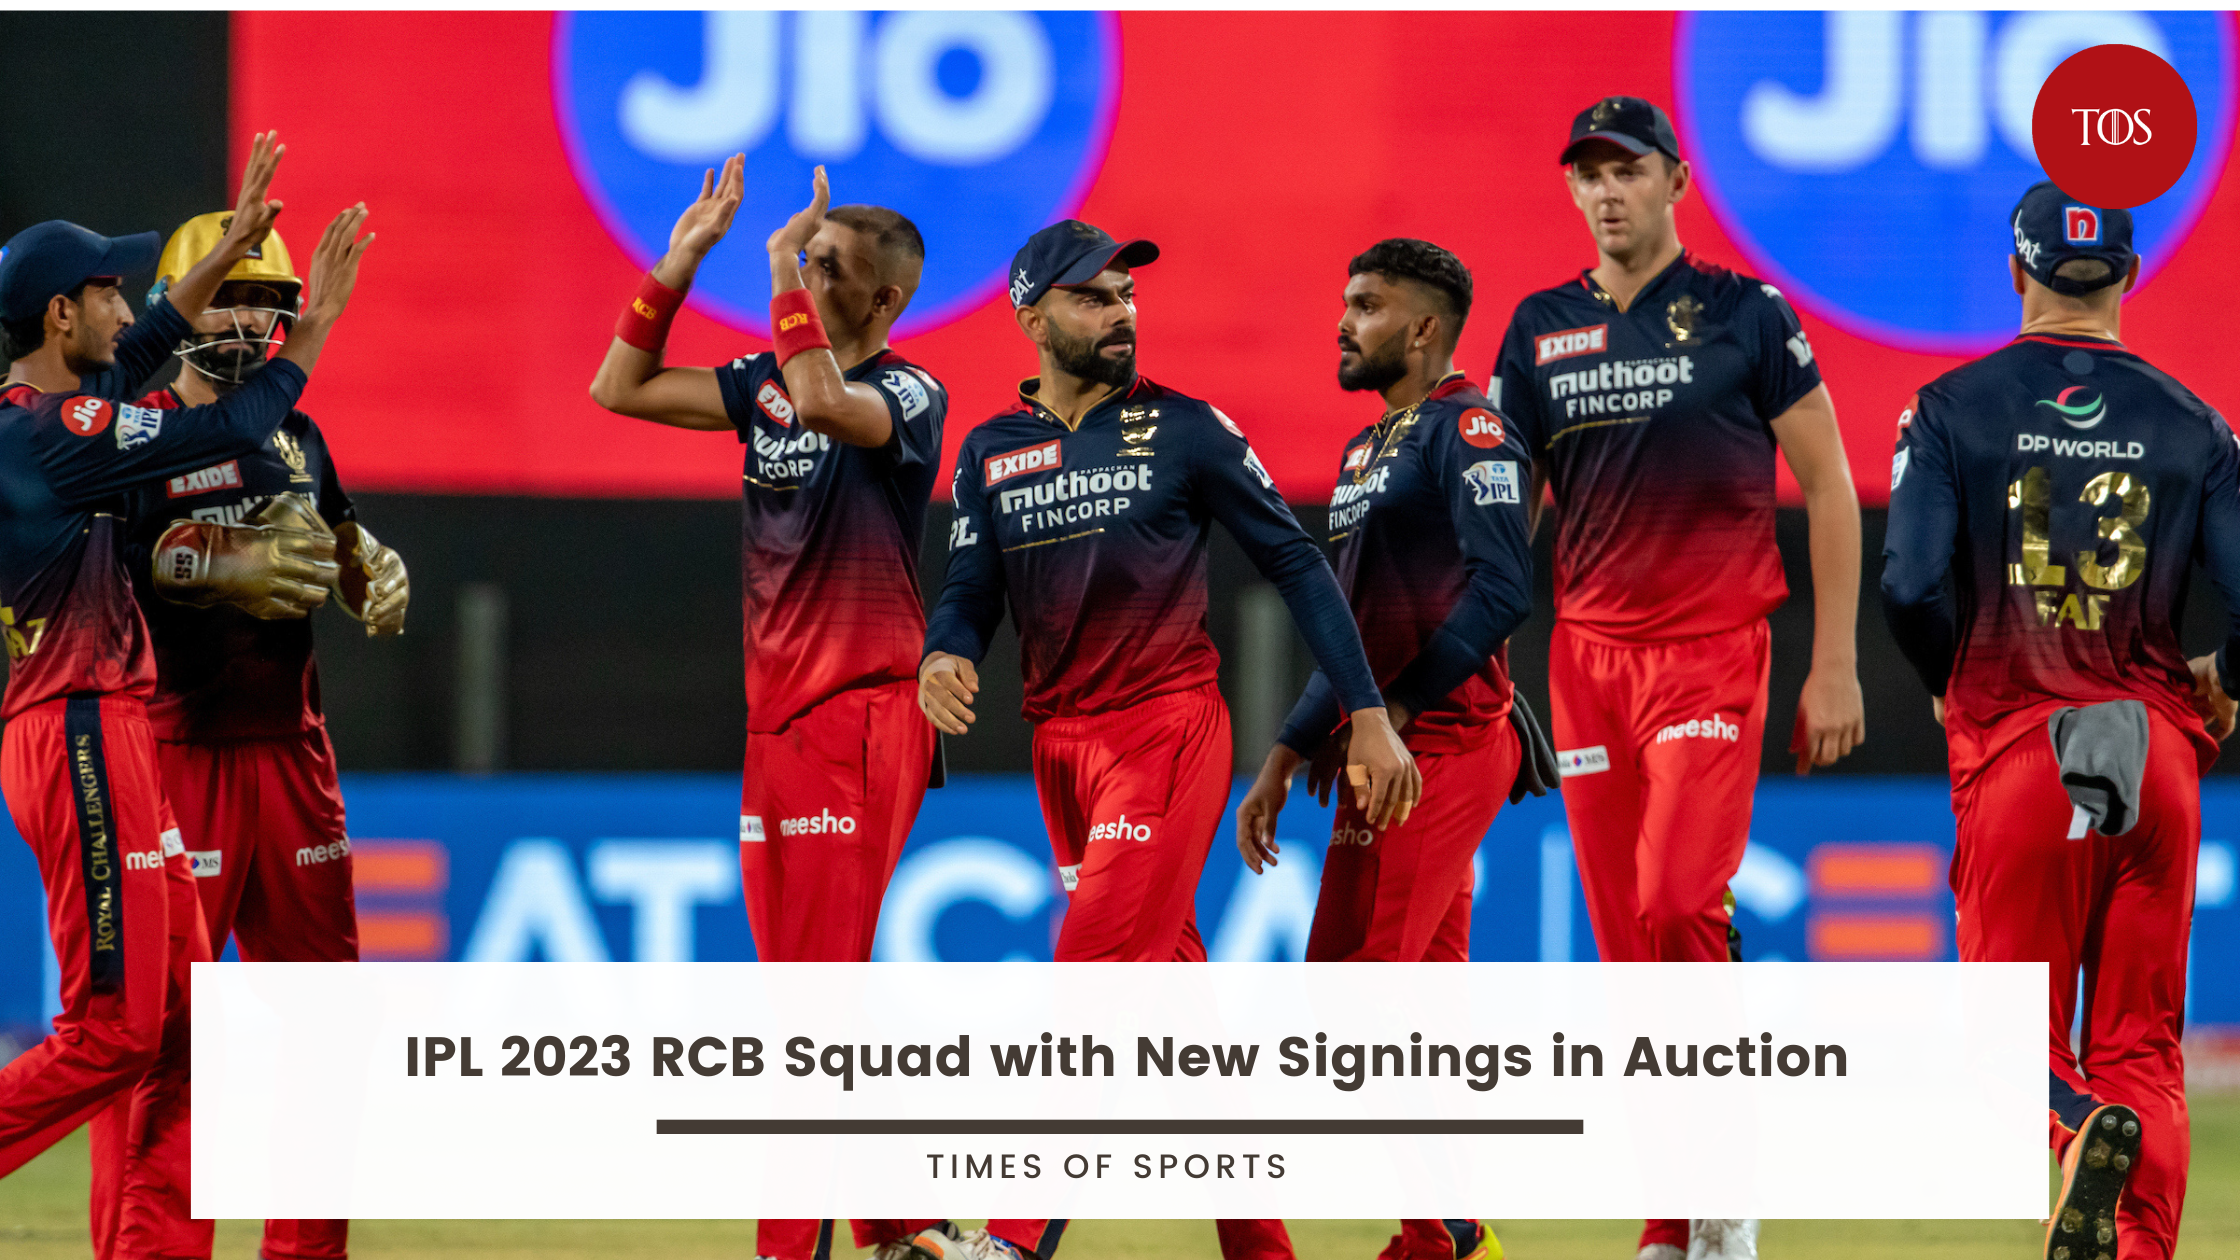 IPL Auction 2024 HIGHLIGHTS: Starc goes to KKR for record Rs 24.75 crore,  SRH signs Cummins for 20.50 crore; Rs 230.45 crore spent on 72 players -  Sportstar